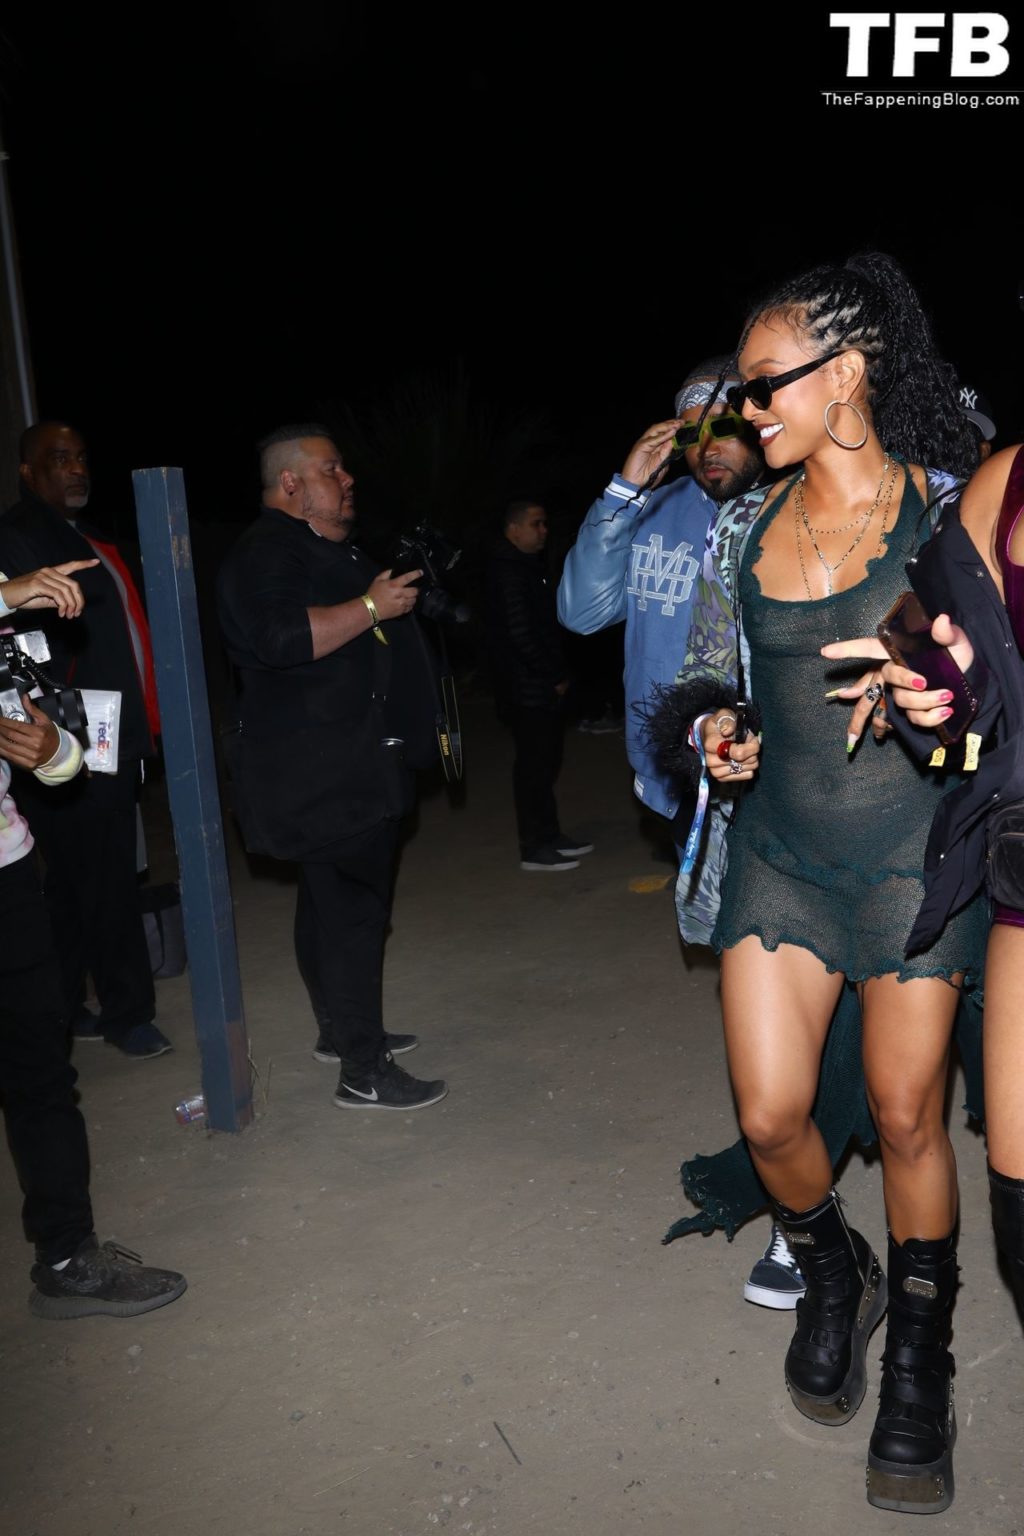 Karrueche Tran Goes Almost Nude in a See-Through Outfit (37 Photos)